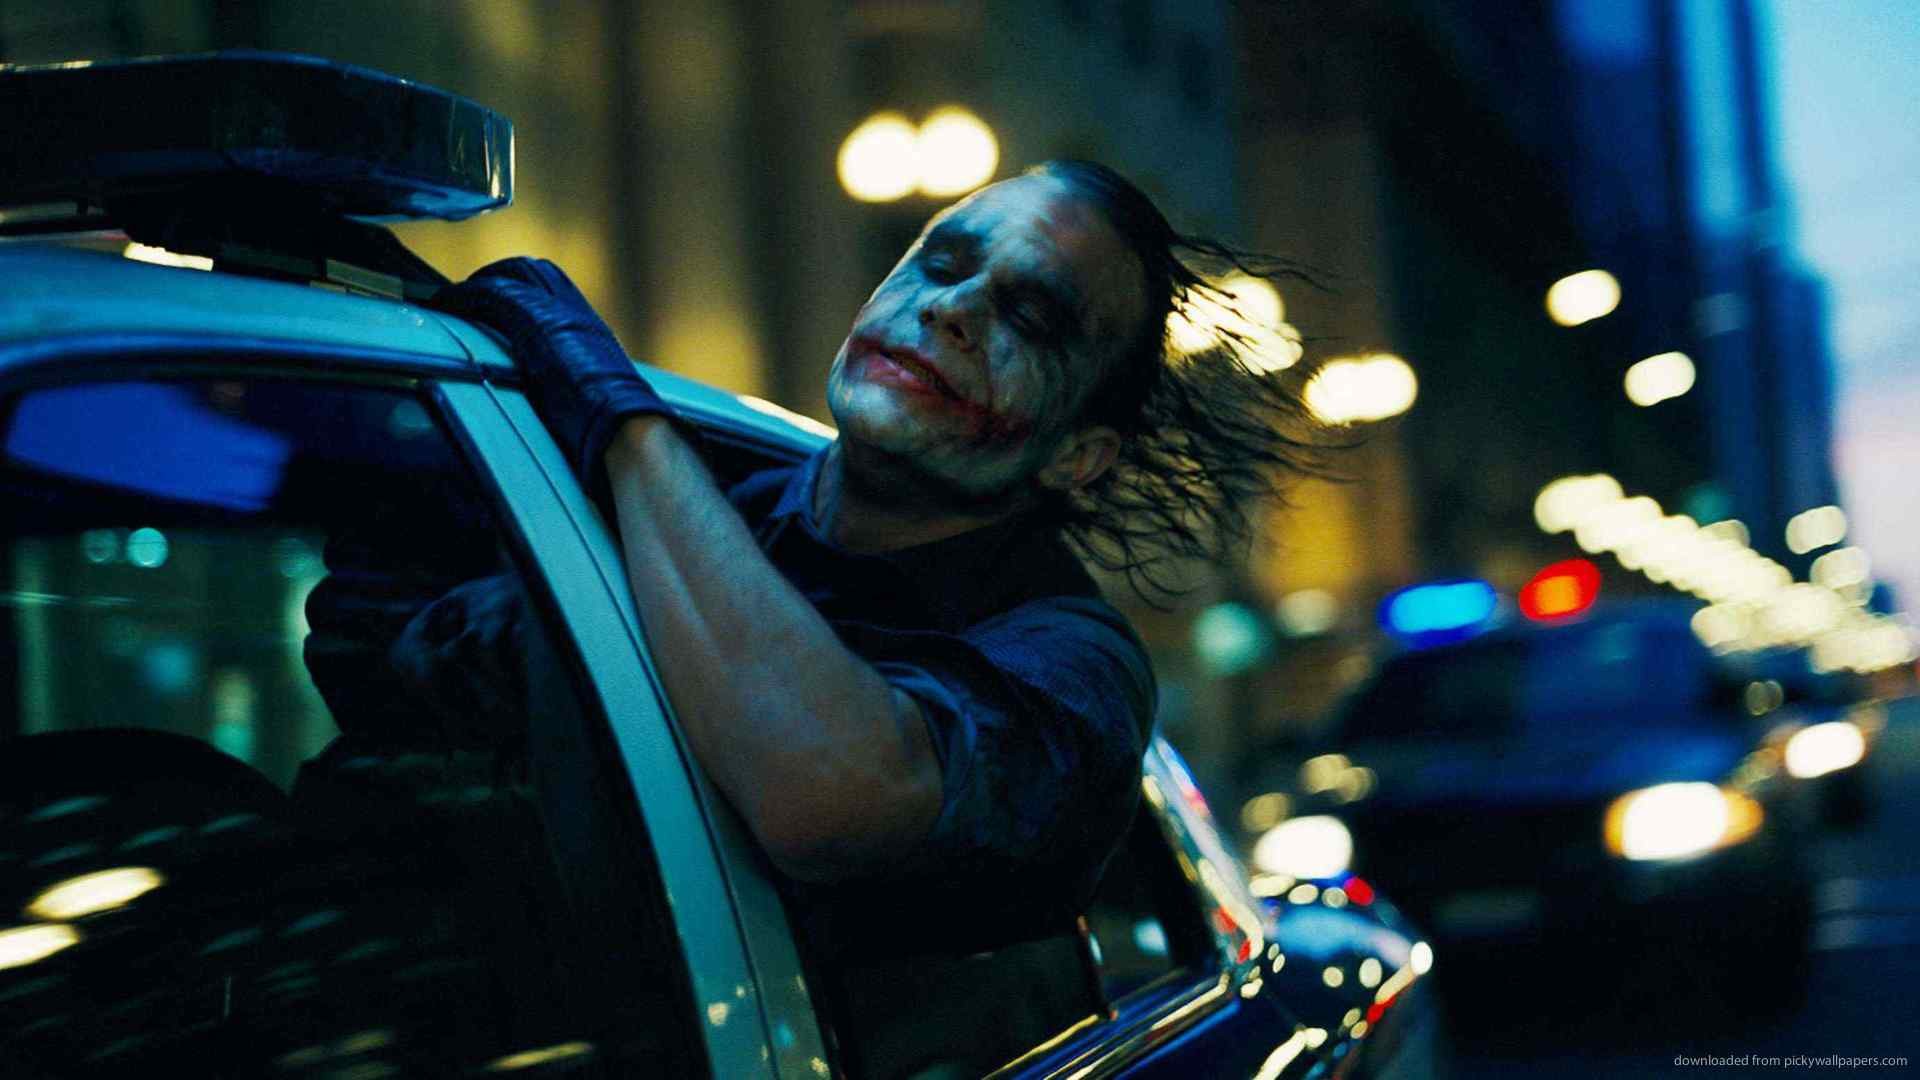 1920x1080 Blackberry, iPad, Joker In A Police Car Screensaver For Kindle3 And .